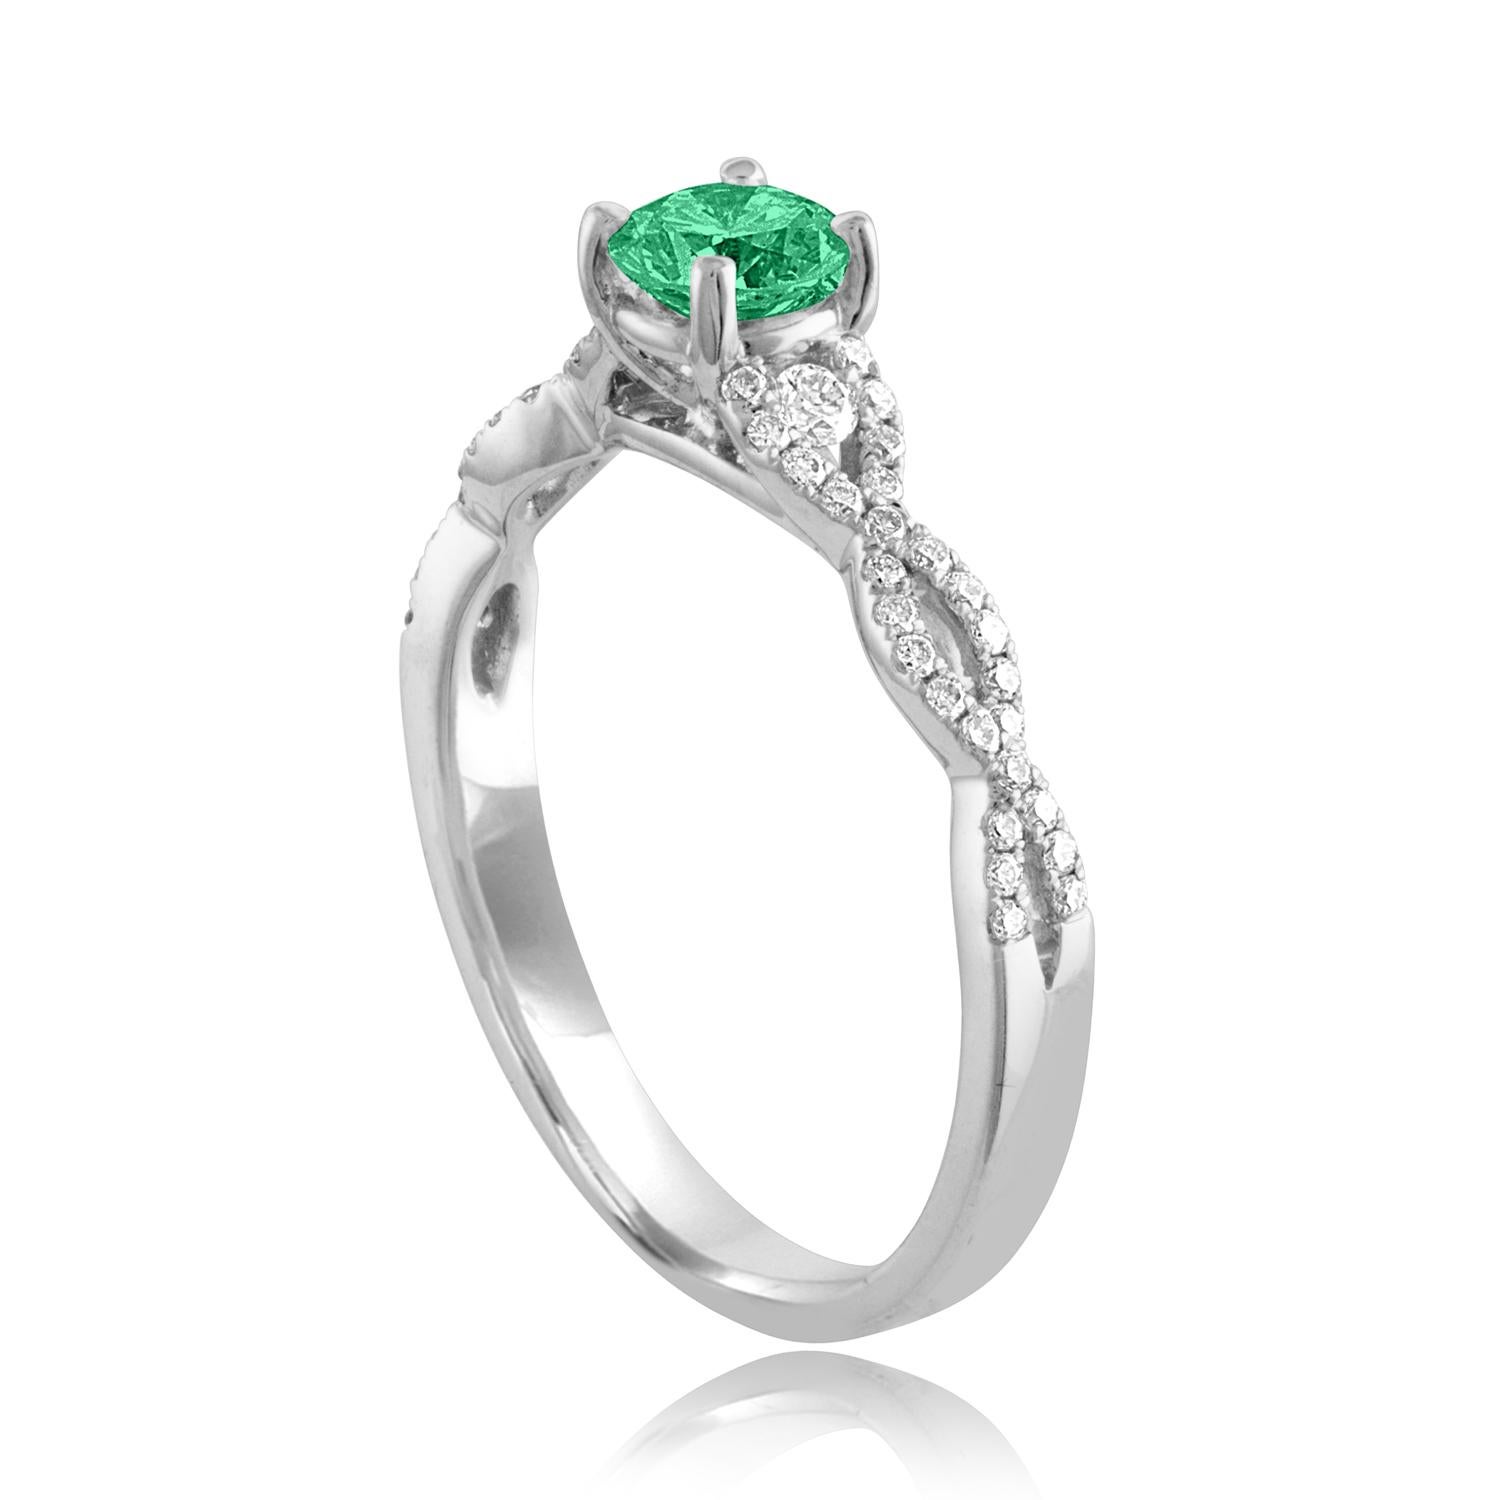 Beautiful Diamond & Emerald Infinity Ring
The ring is 18K White Gold.
There are 0.31 Carats in Diamonds F/G VS/SI
The Center is Round 0.36 Carat Emerald.
The Emerald is AGL certified.
The ring is a size 6.50, sizable.
The ring weighs 2.5 grams.